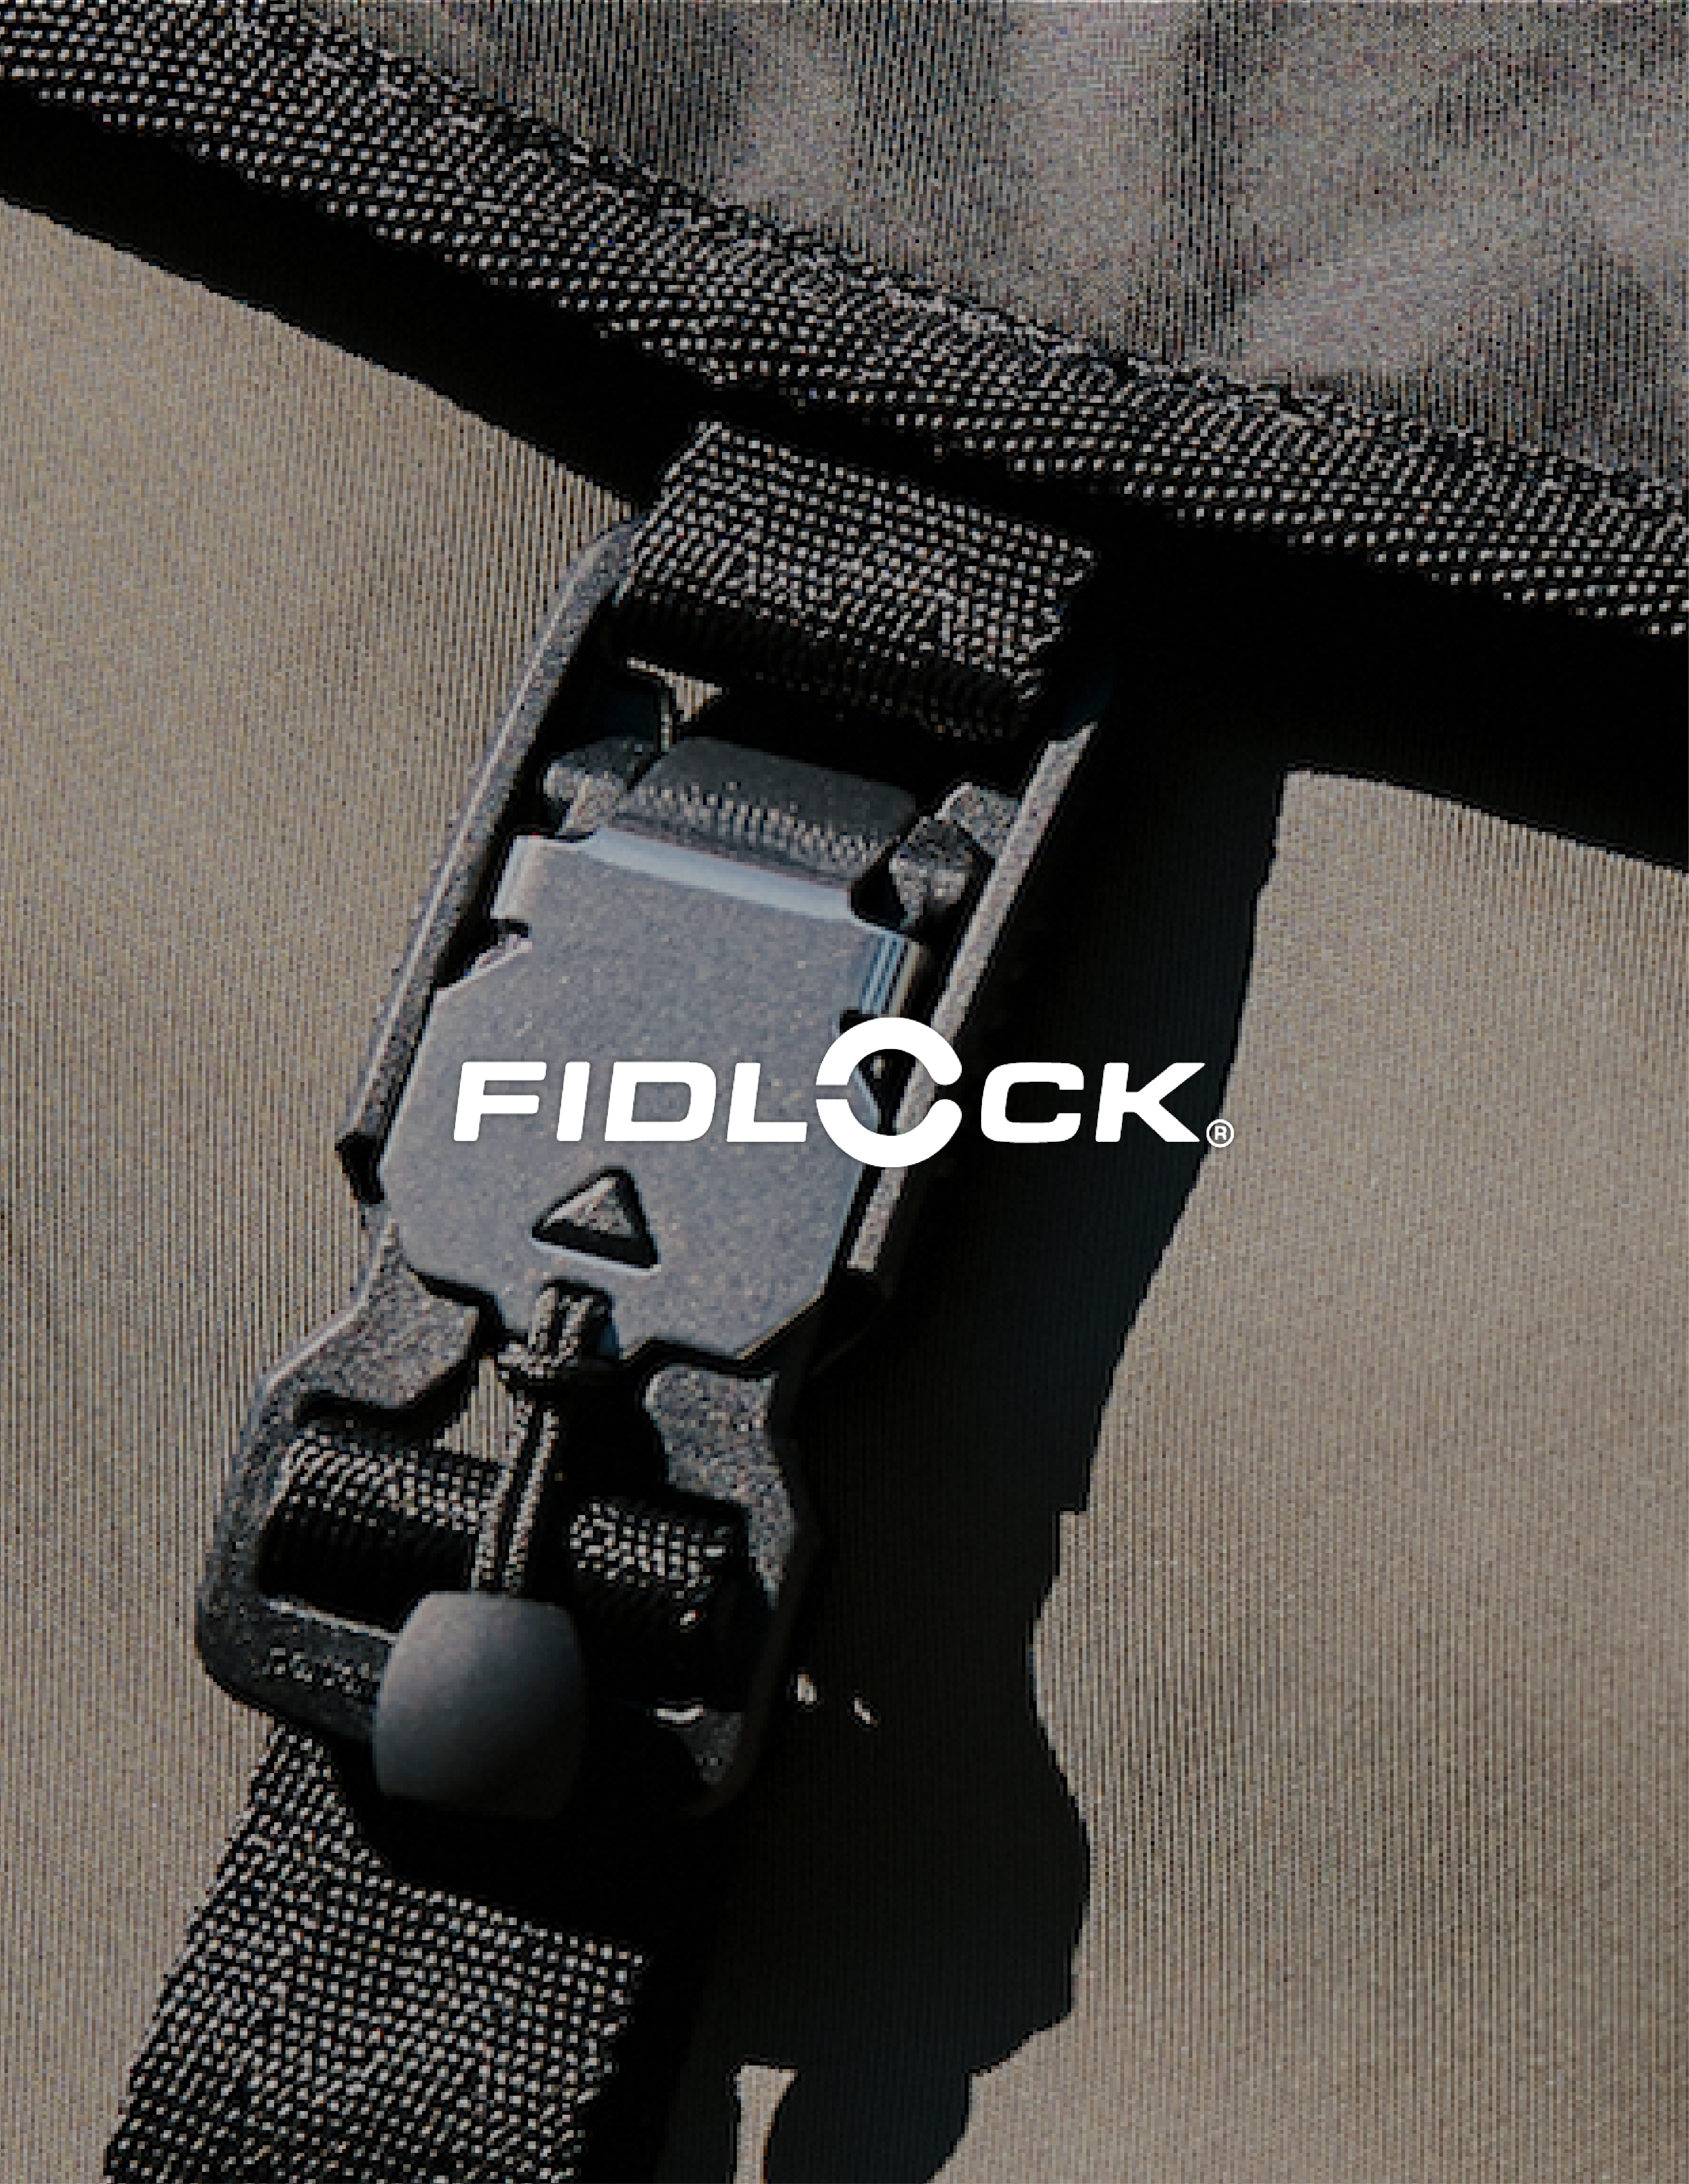 Fidlock • A+ Products Inc